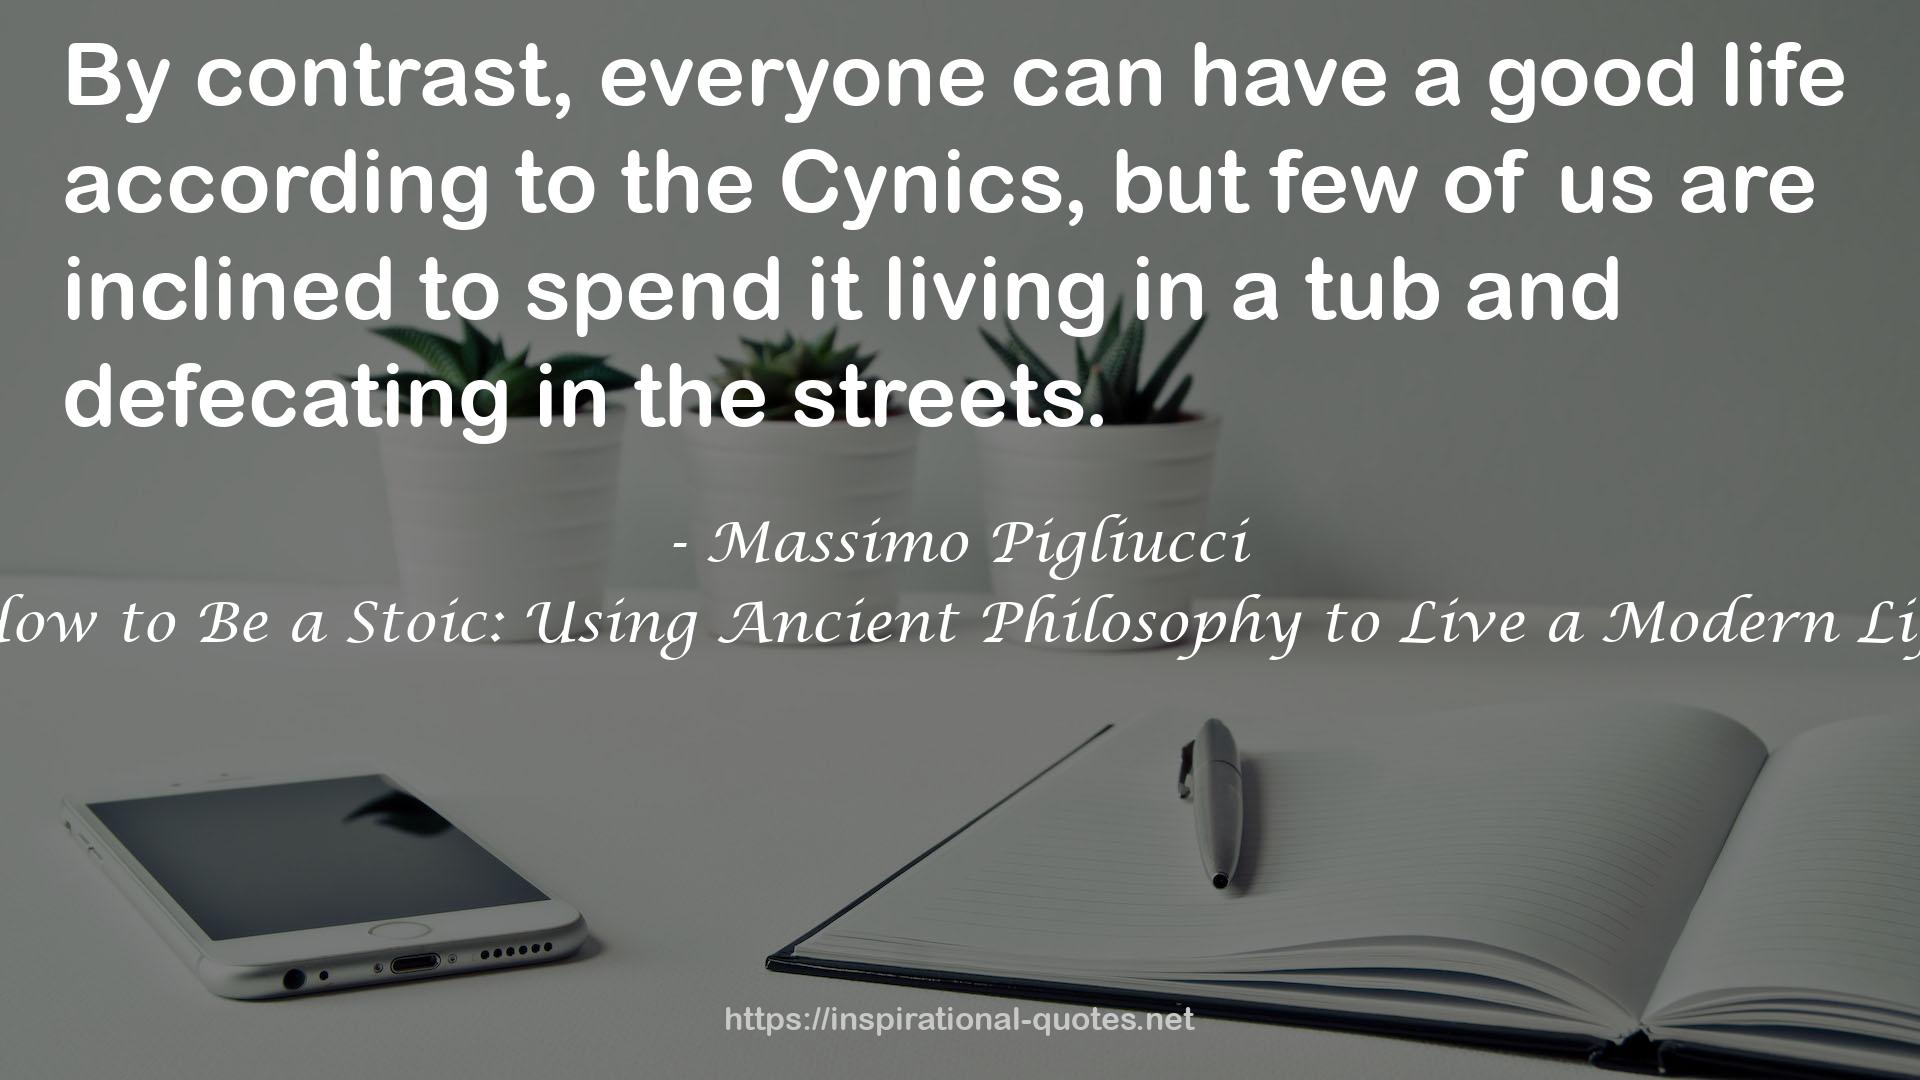 How to Be a Stoic: Using Ancient Philosophy to Live a Modern Life QUOTES